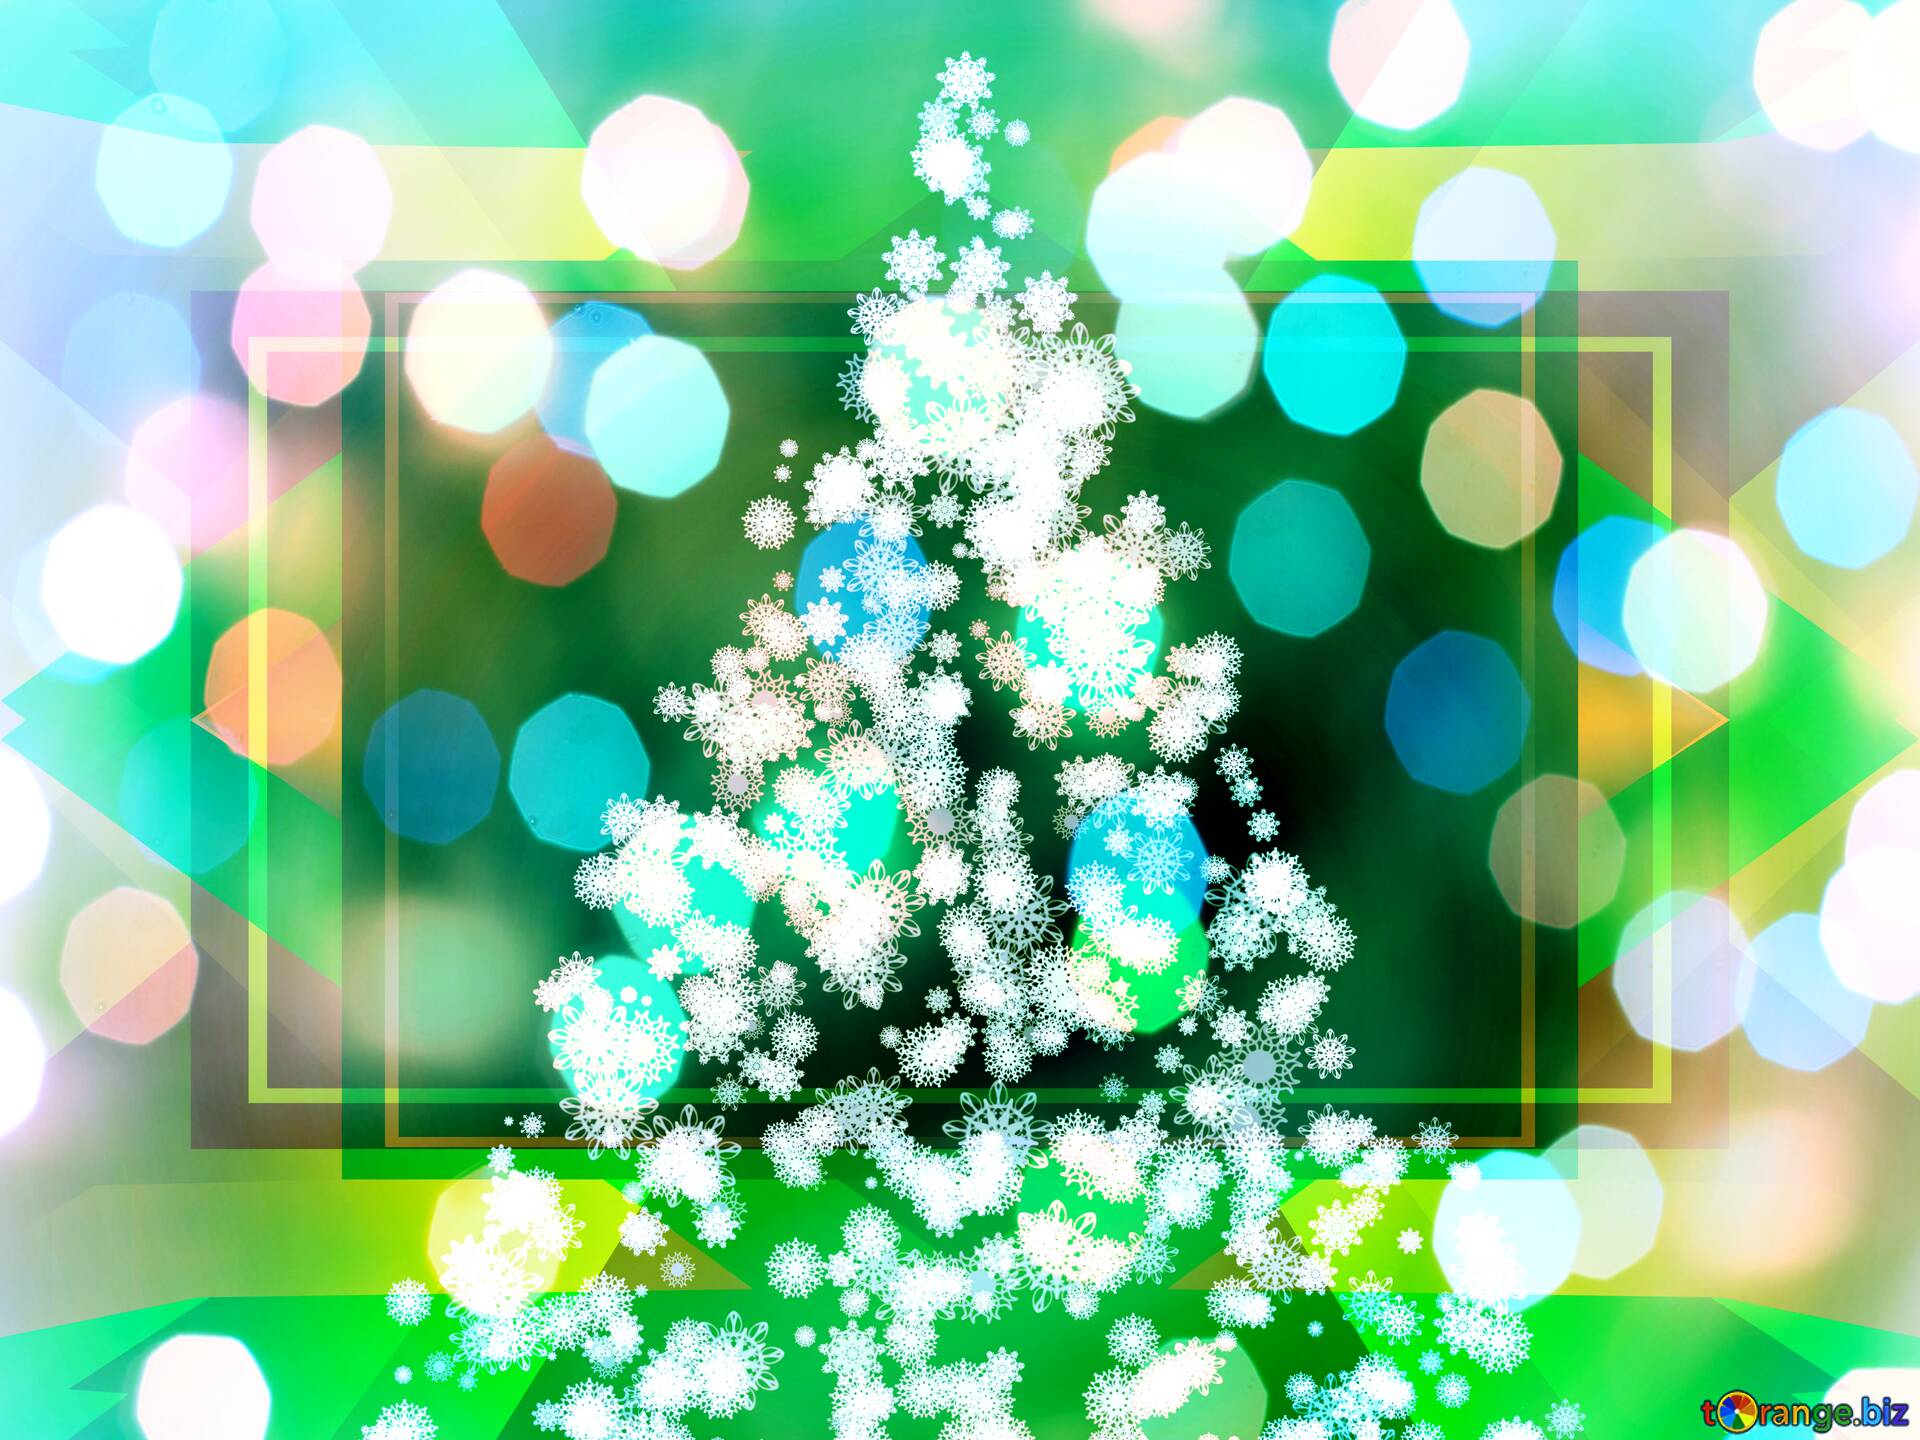 Download Free Picture Snowflake Tree Christmas Design For Greeting Card. Frame Illustration, Merry Xmas Snow Flake Header Or Banner, Wallpaper Or Backdrop Decor On CC BY License Free Image Stock TOrange.biz